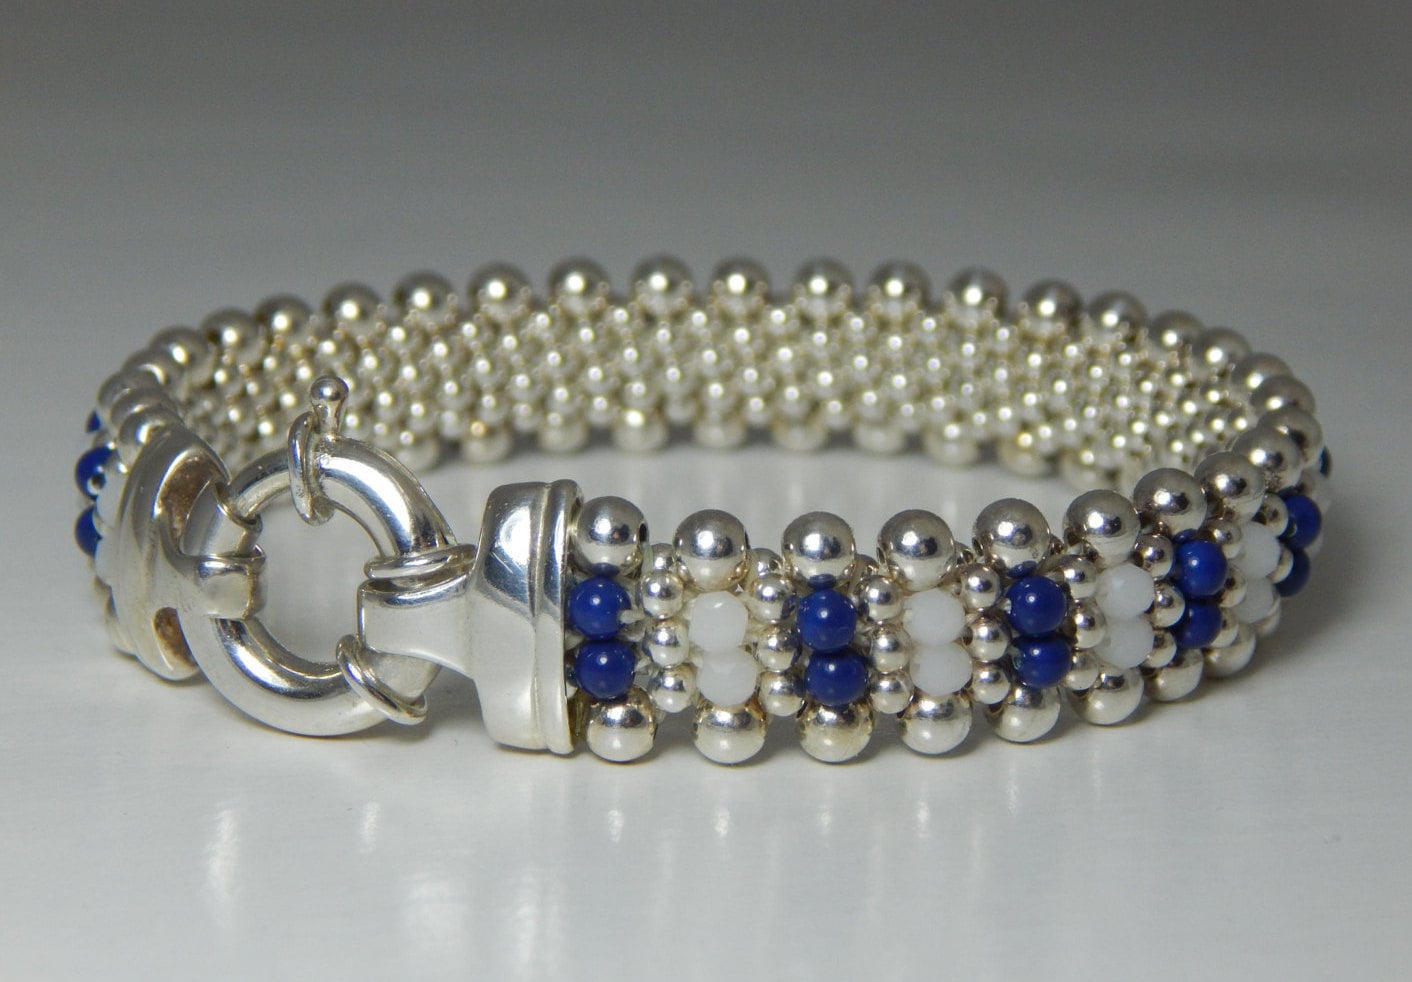 Villanova Spirit Blue and White Crystal Beads and Sterling Silver ...